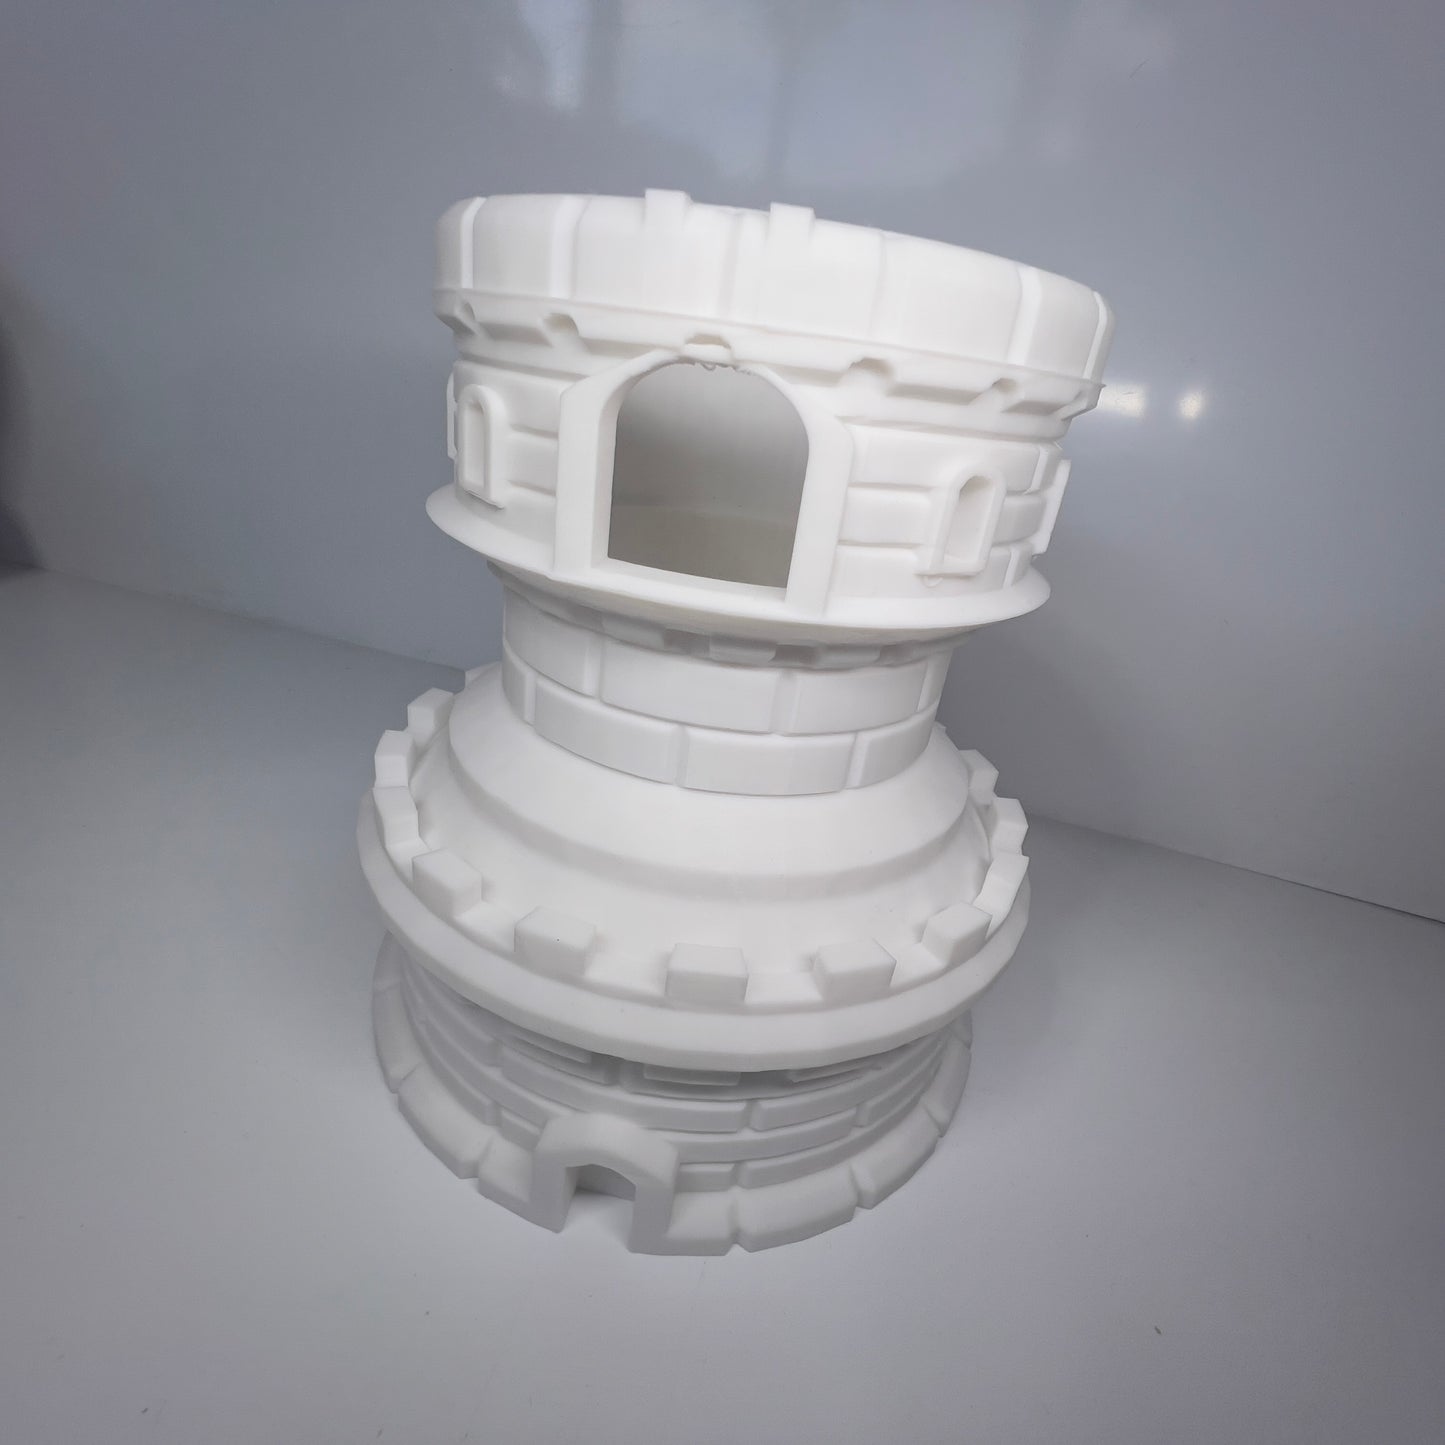 Castle Bird House - Camera Compatible - 3D Printed